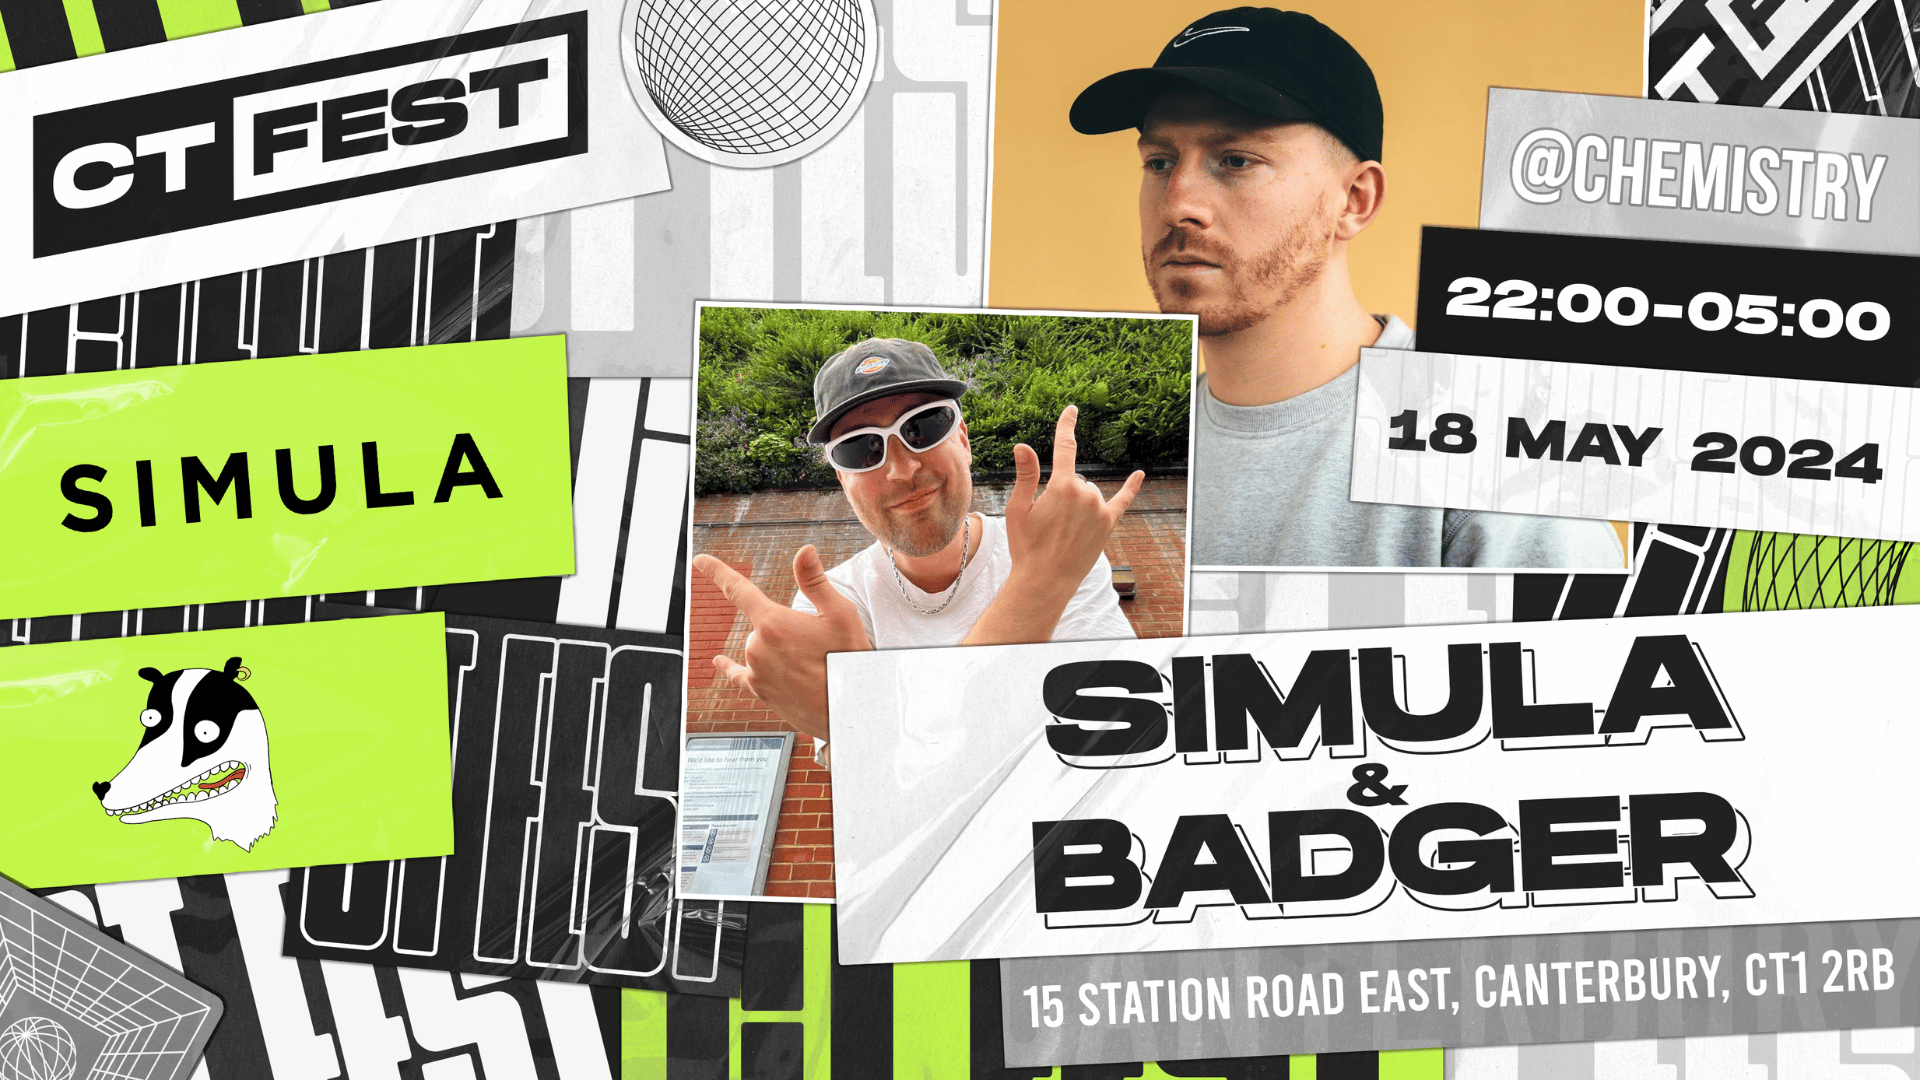 CT Fest ∙ SIMULA & BADGER *ONLY 14 £6 TICKETS LEFT*